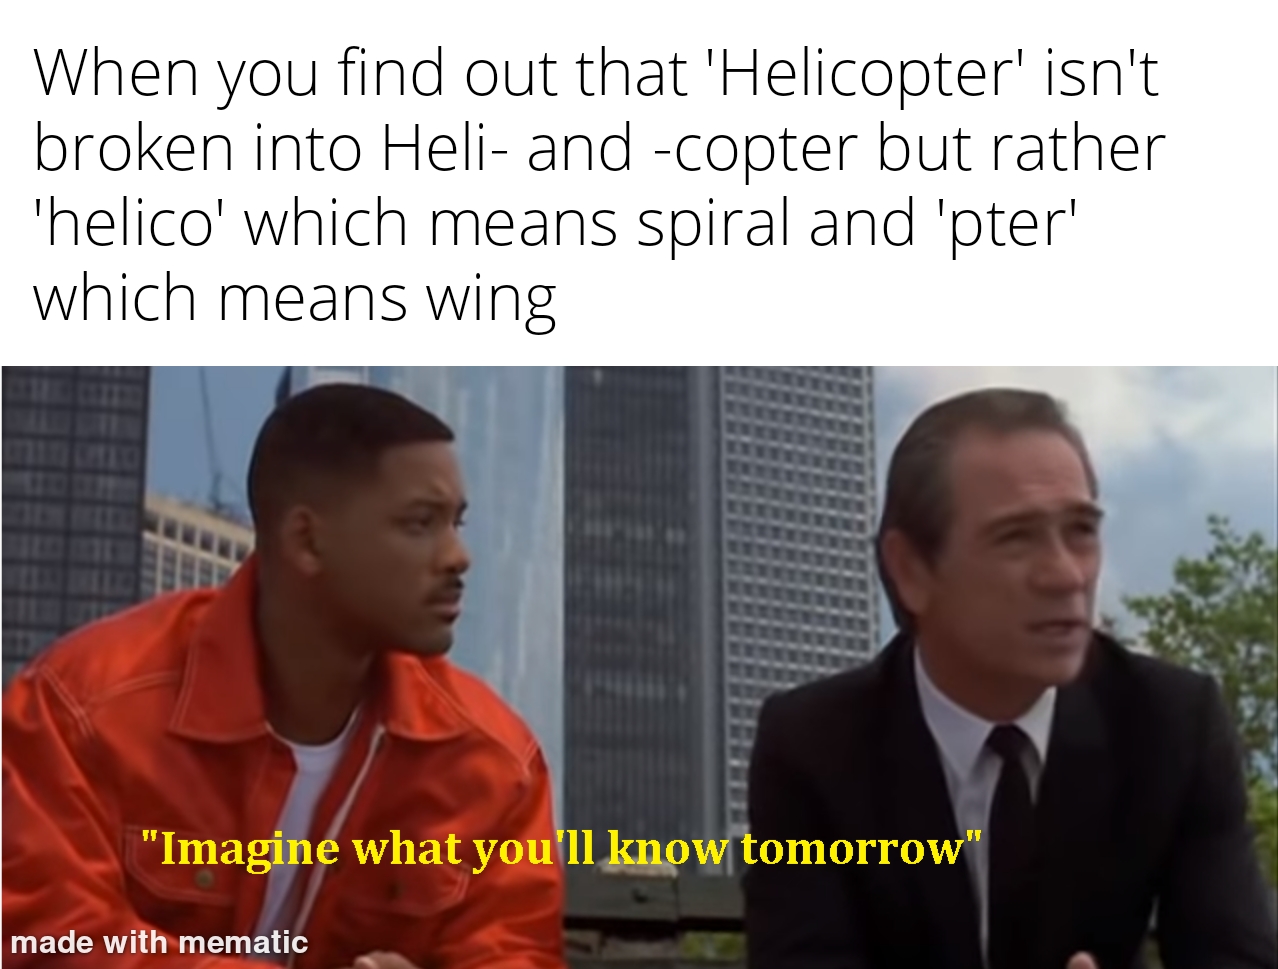 presentation - When you find out that 'Helicopter' isn't broken into Heli and copter but rather 'helico' which means spiral and 'pter' which means wing "Imagine what you'll know tomorrow" made with mematic